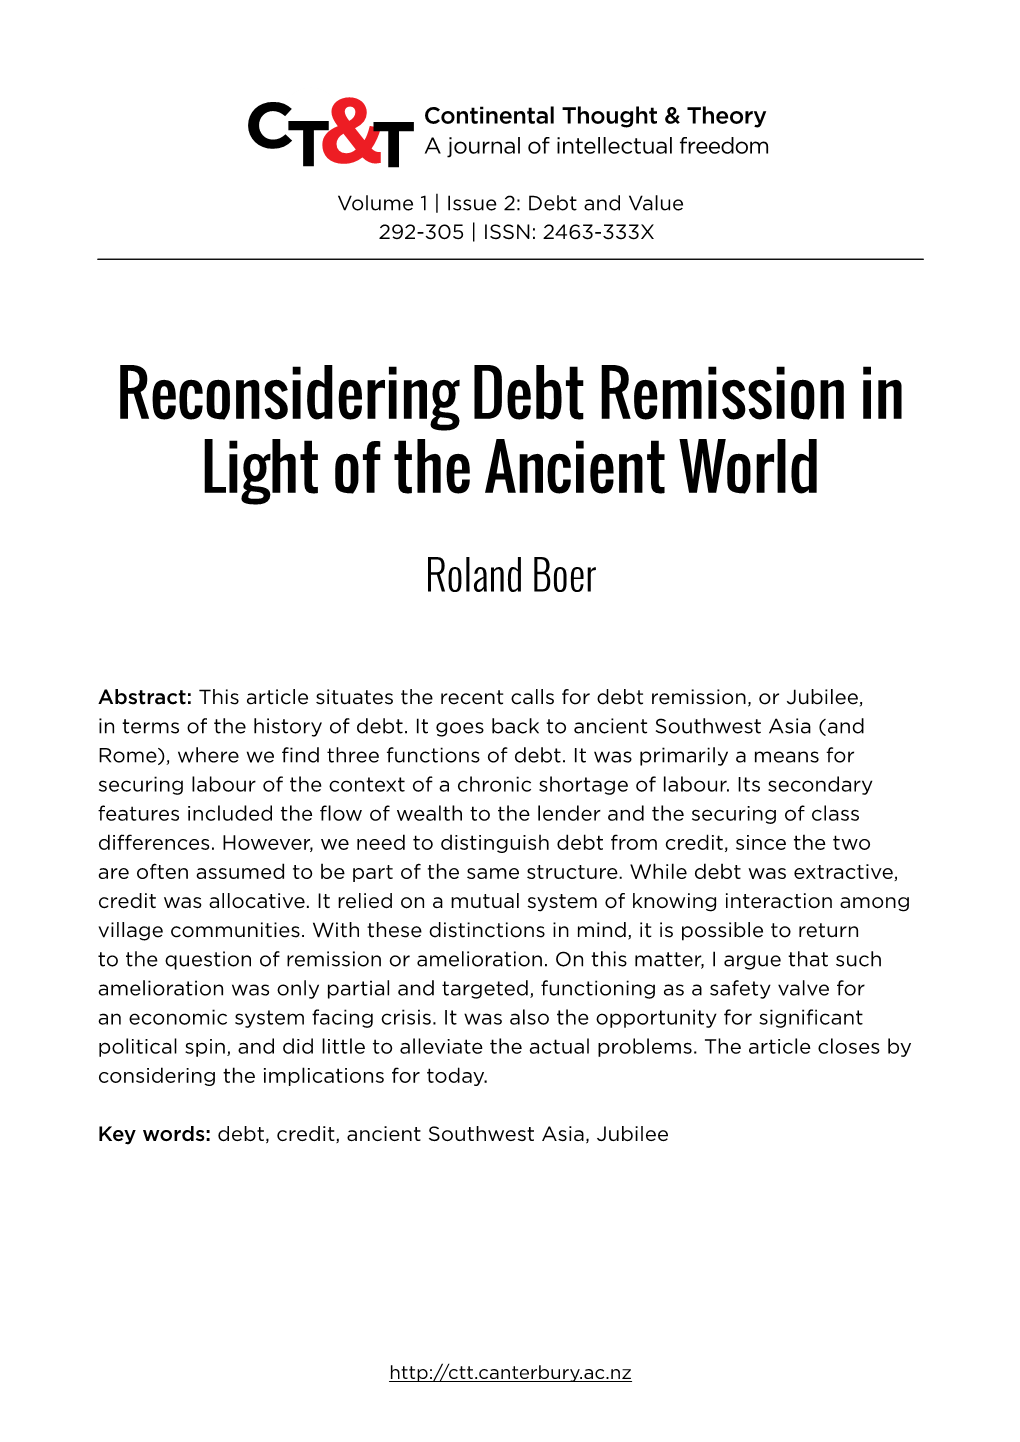 Reconsidering Debt Remission in Light of the Ancient World